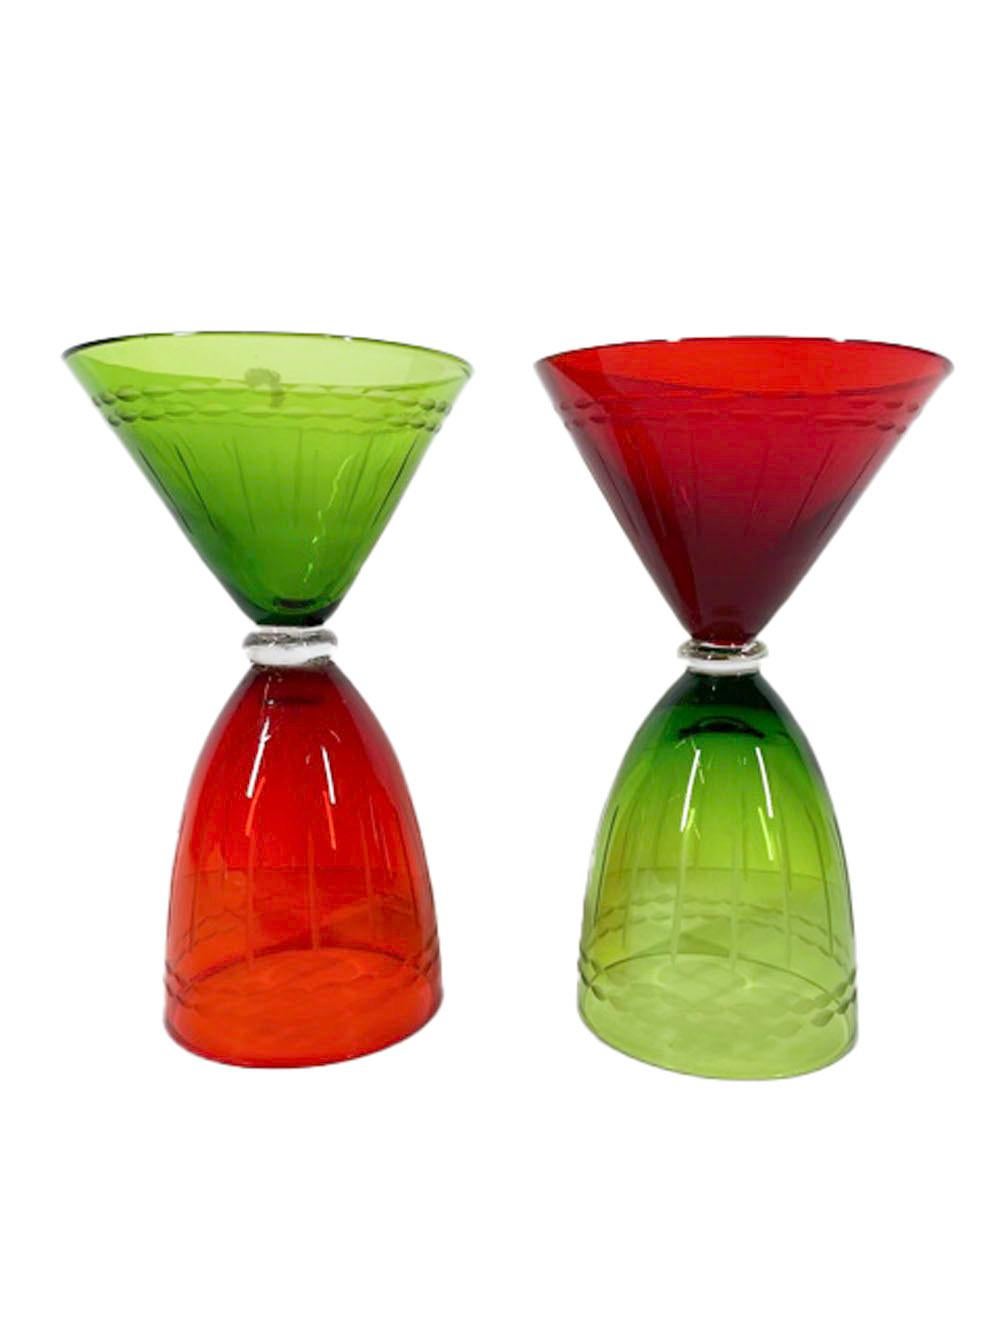 Vintage set of six glasses, each with two bowls, a martini on one side attached to a wine on the other by a clear glass ring. Three pairs made of jewel-toned glass with cut vertical lines and rings of dashed lines. Each two-colored pair in opposing